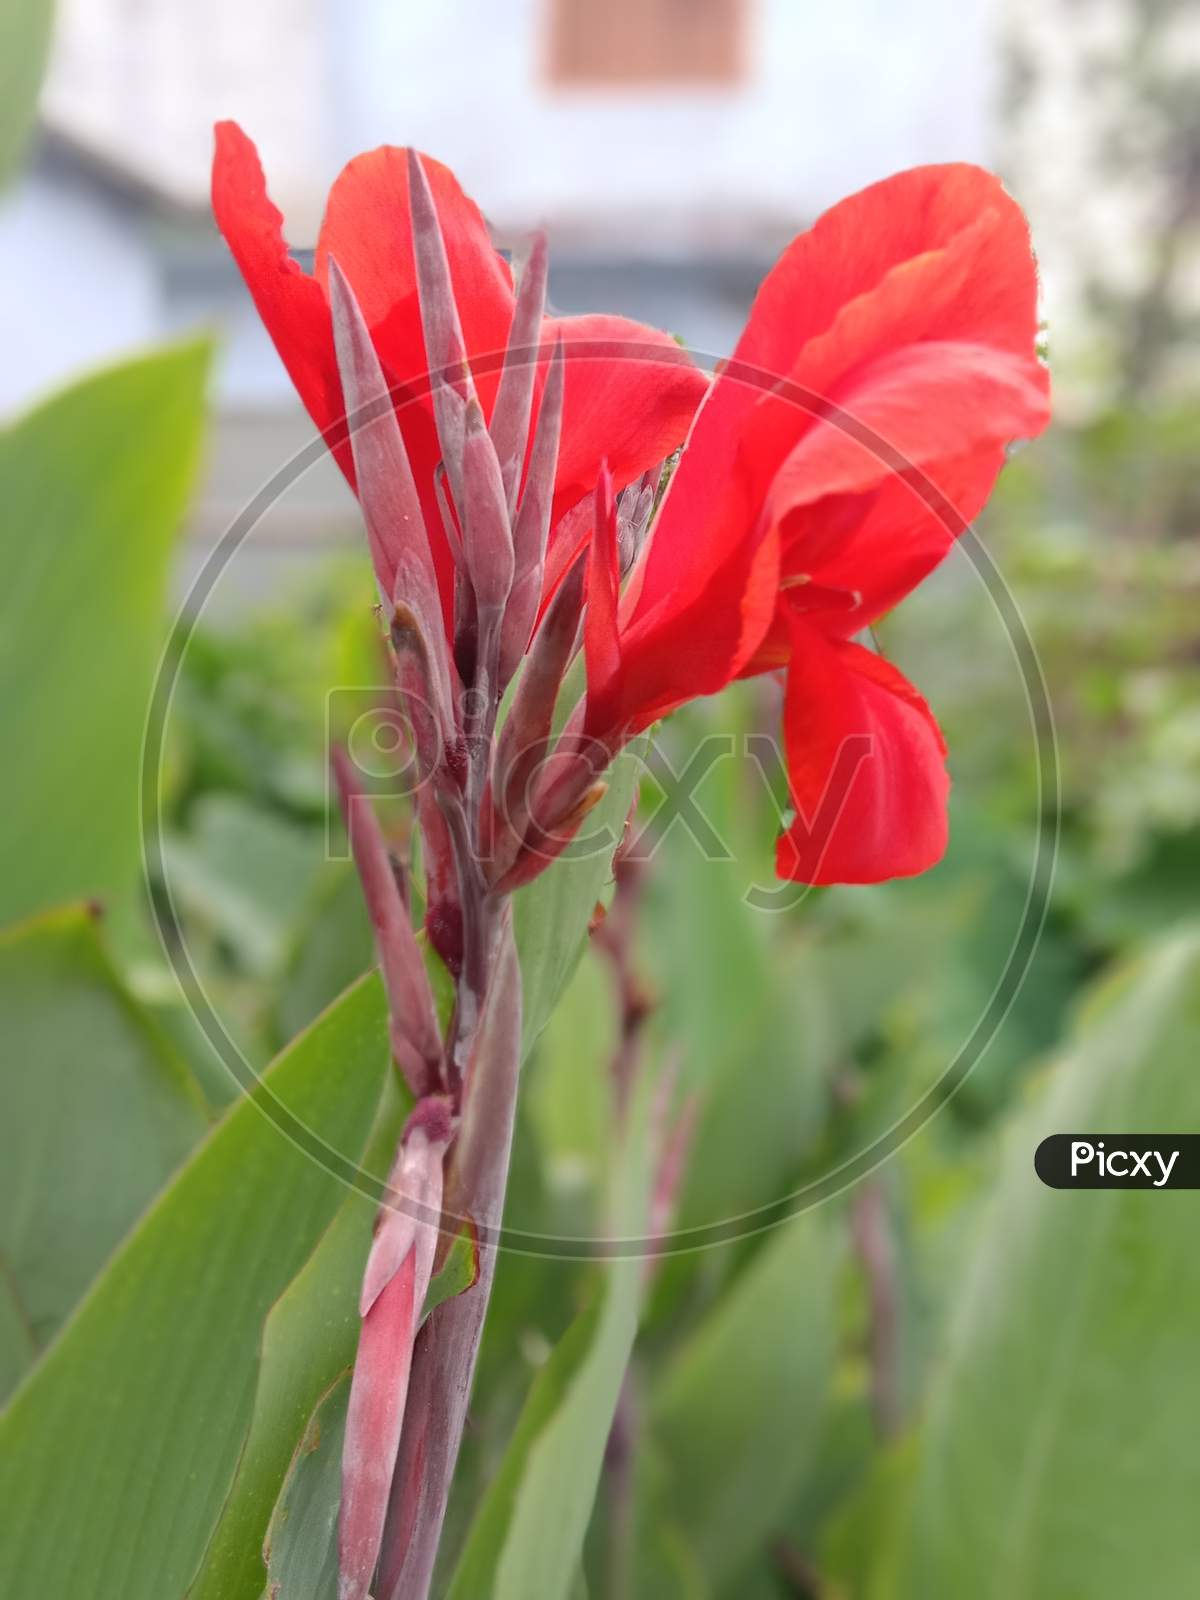 a beautiful looking red anthurium flower.